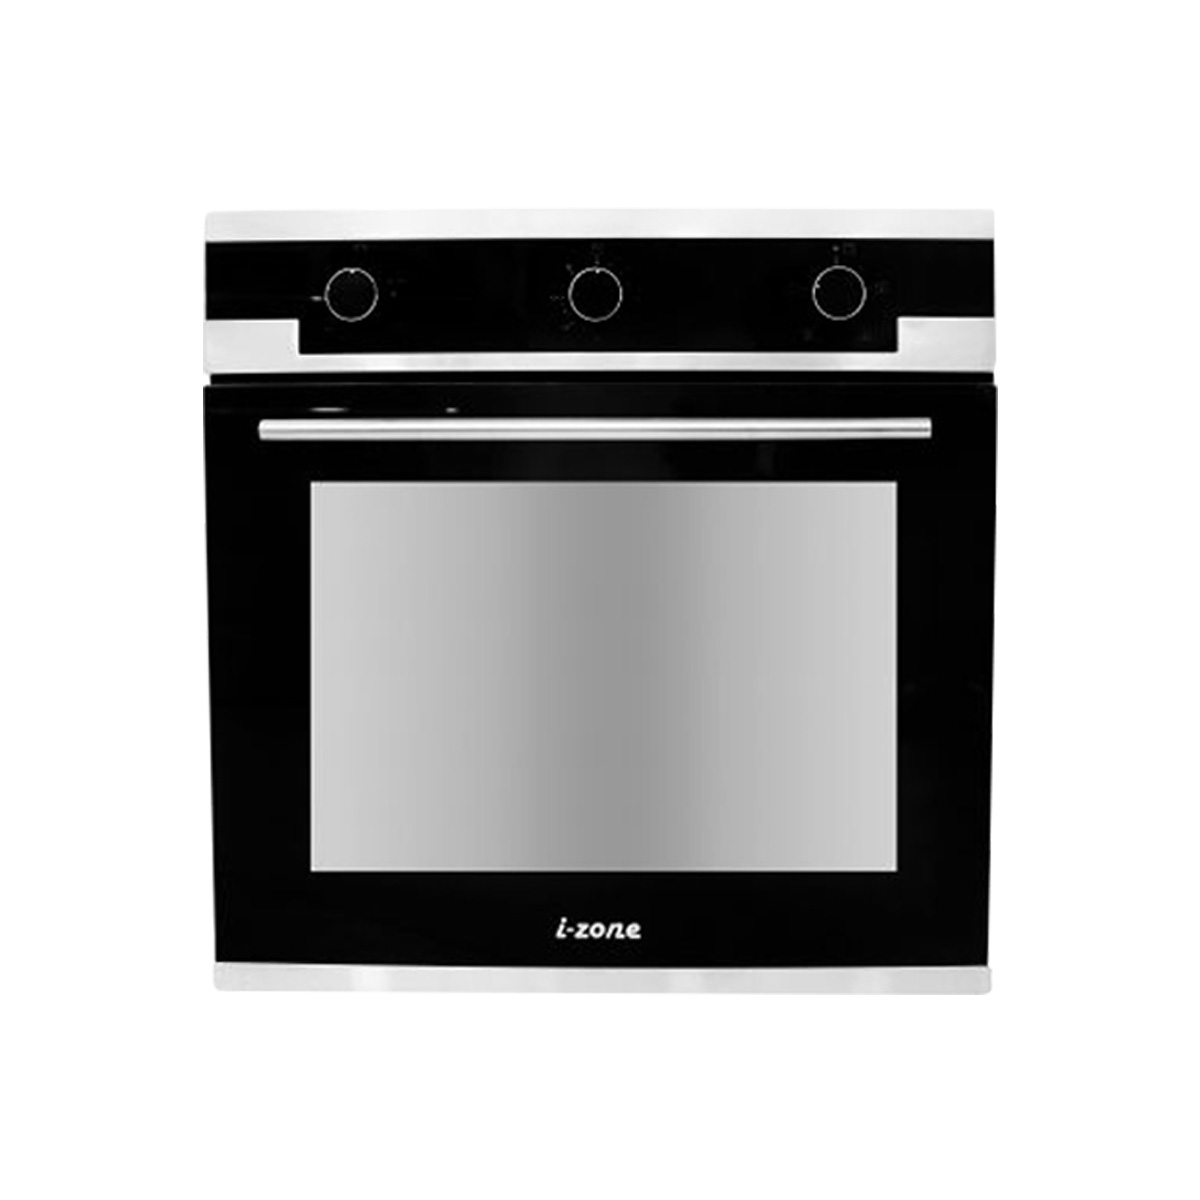 i-zone-Built-in-Oven-MAS-1040EG-10-Function-Electric-&-Gas